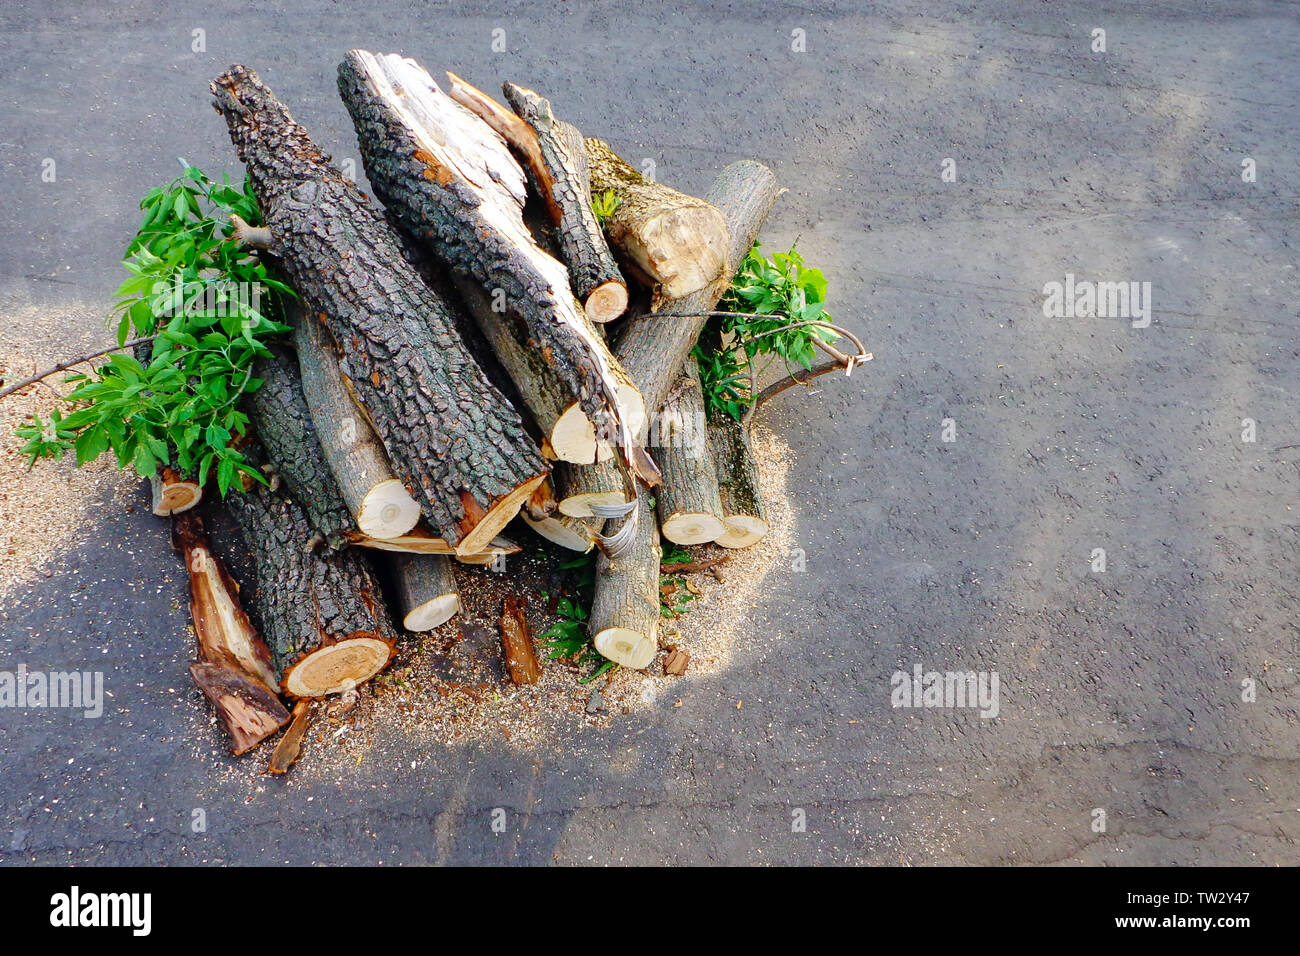 Freshly cut wooden logs with leaves are stacked on asphalt road. Pruning and cutting down diseased trees in urban parks. Stock Photo